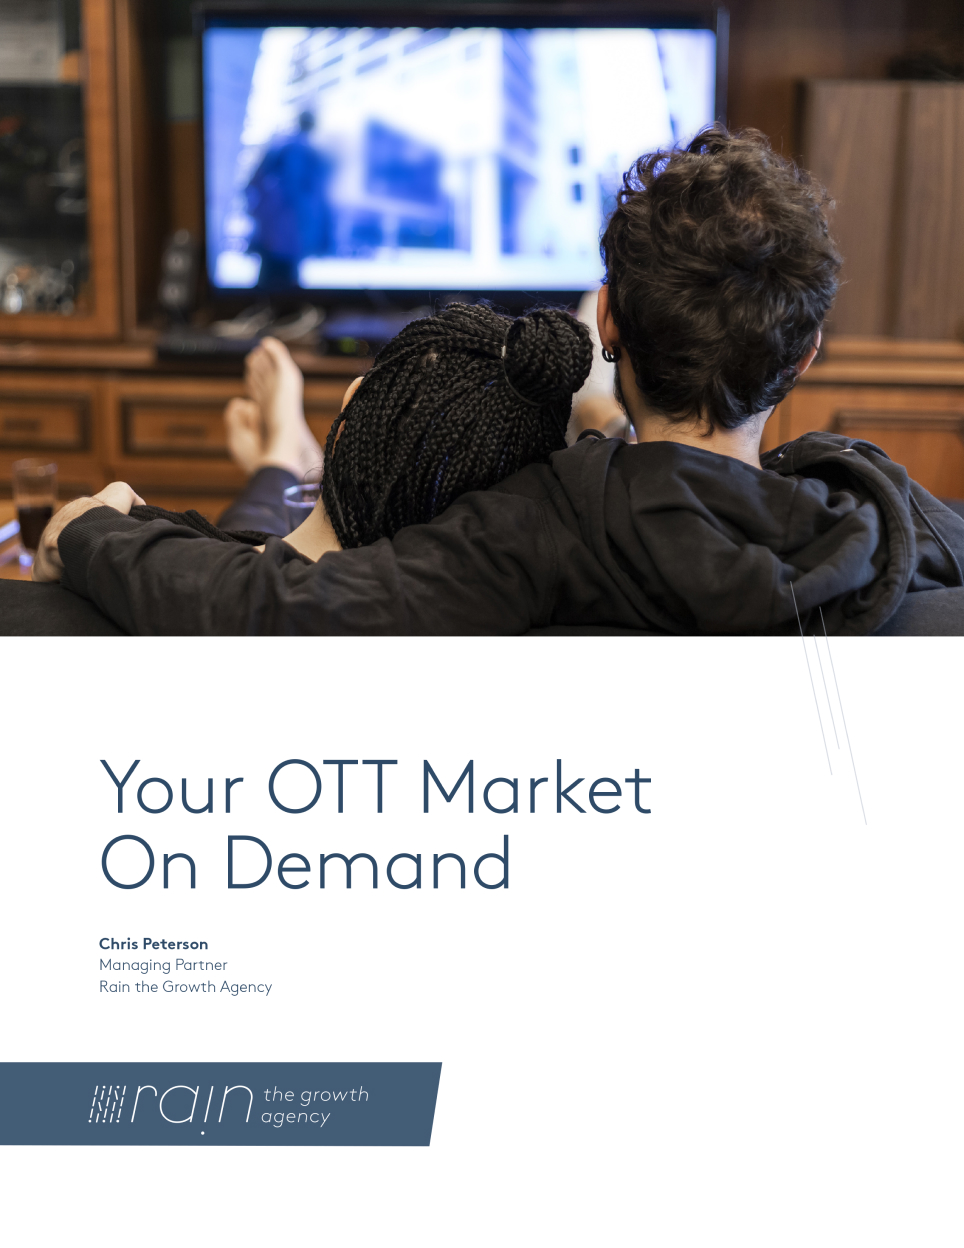 Image of a free guide produced by Rain the Growth Agency: “Your OTT Market on Demand”